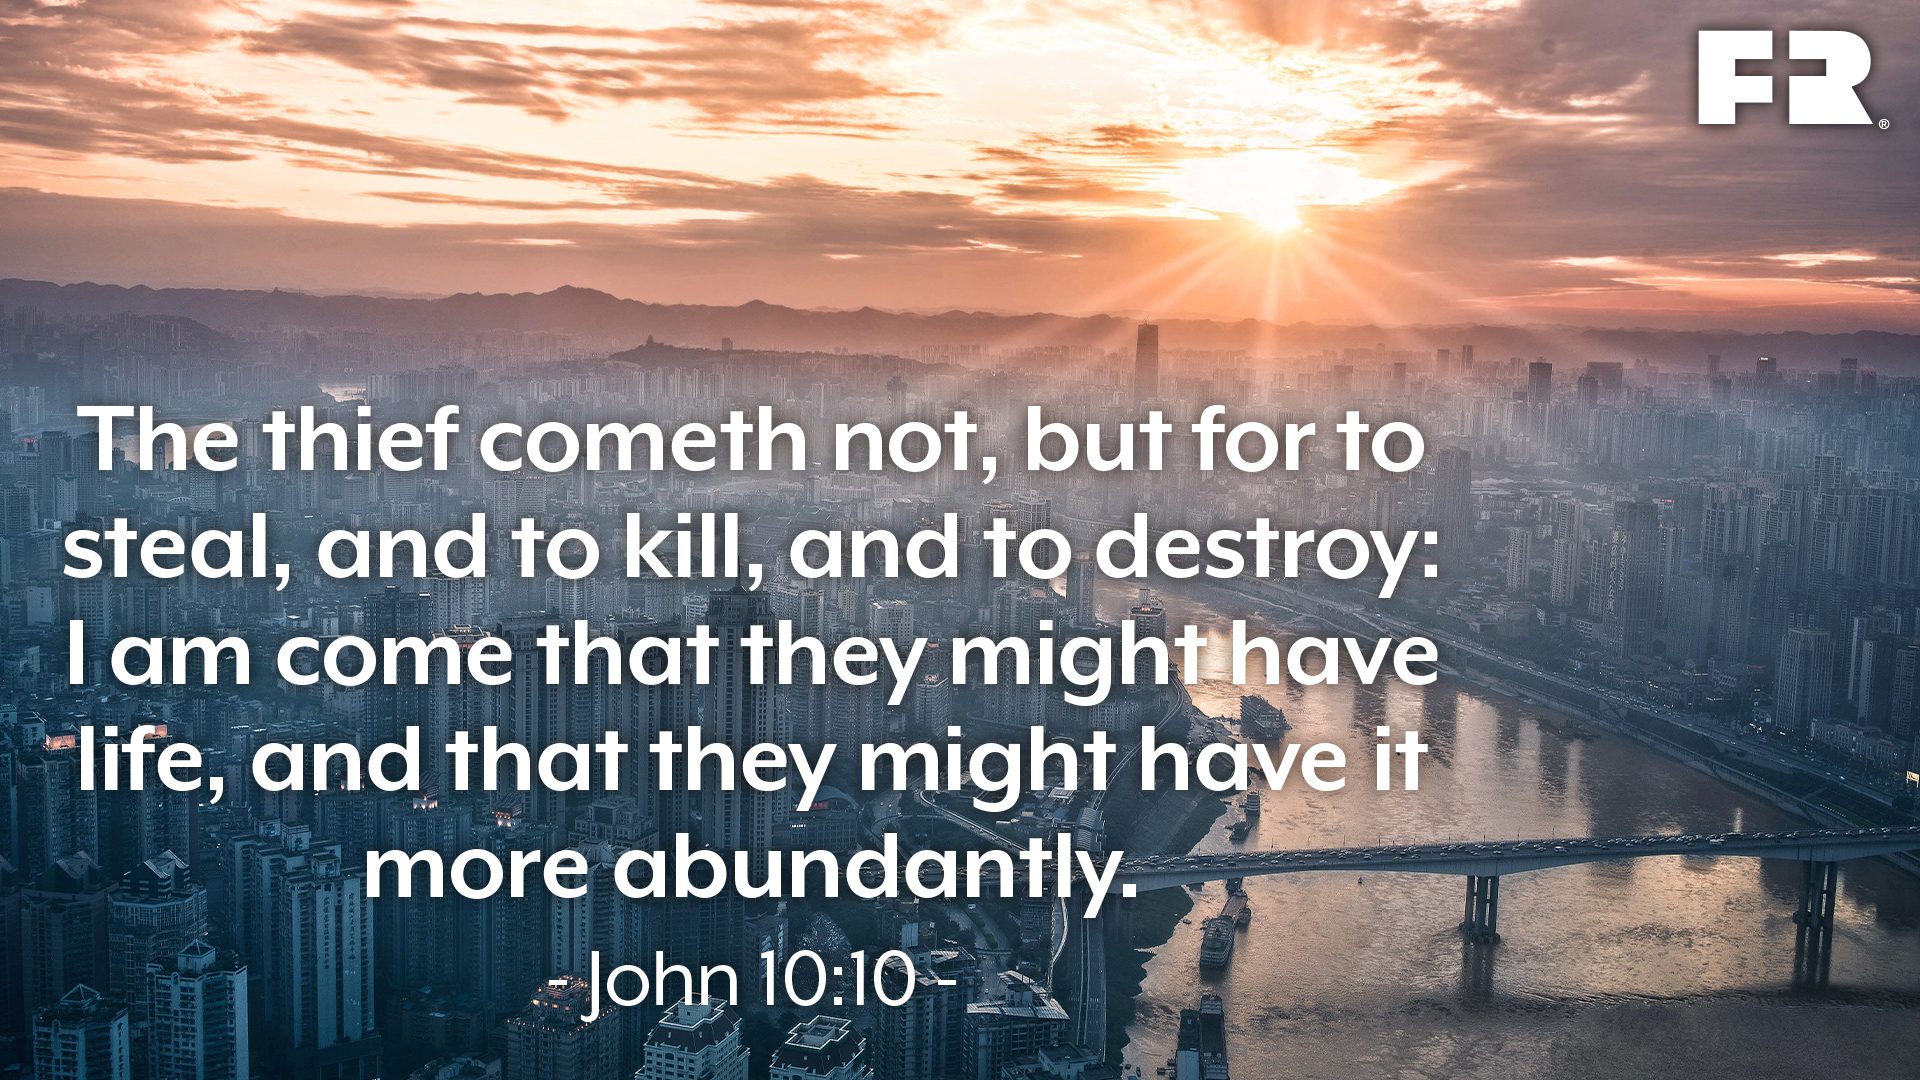 “The thief cometh not, but for to steal, and to kill, and to destroy: I am come that they might have life, and that they might have it more abundantly.”